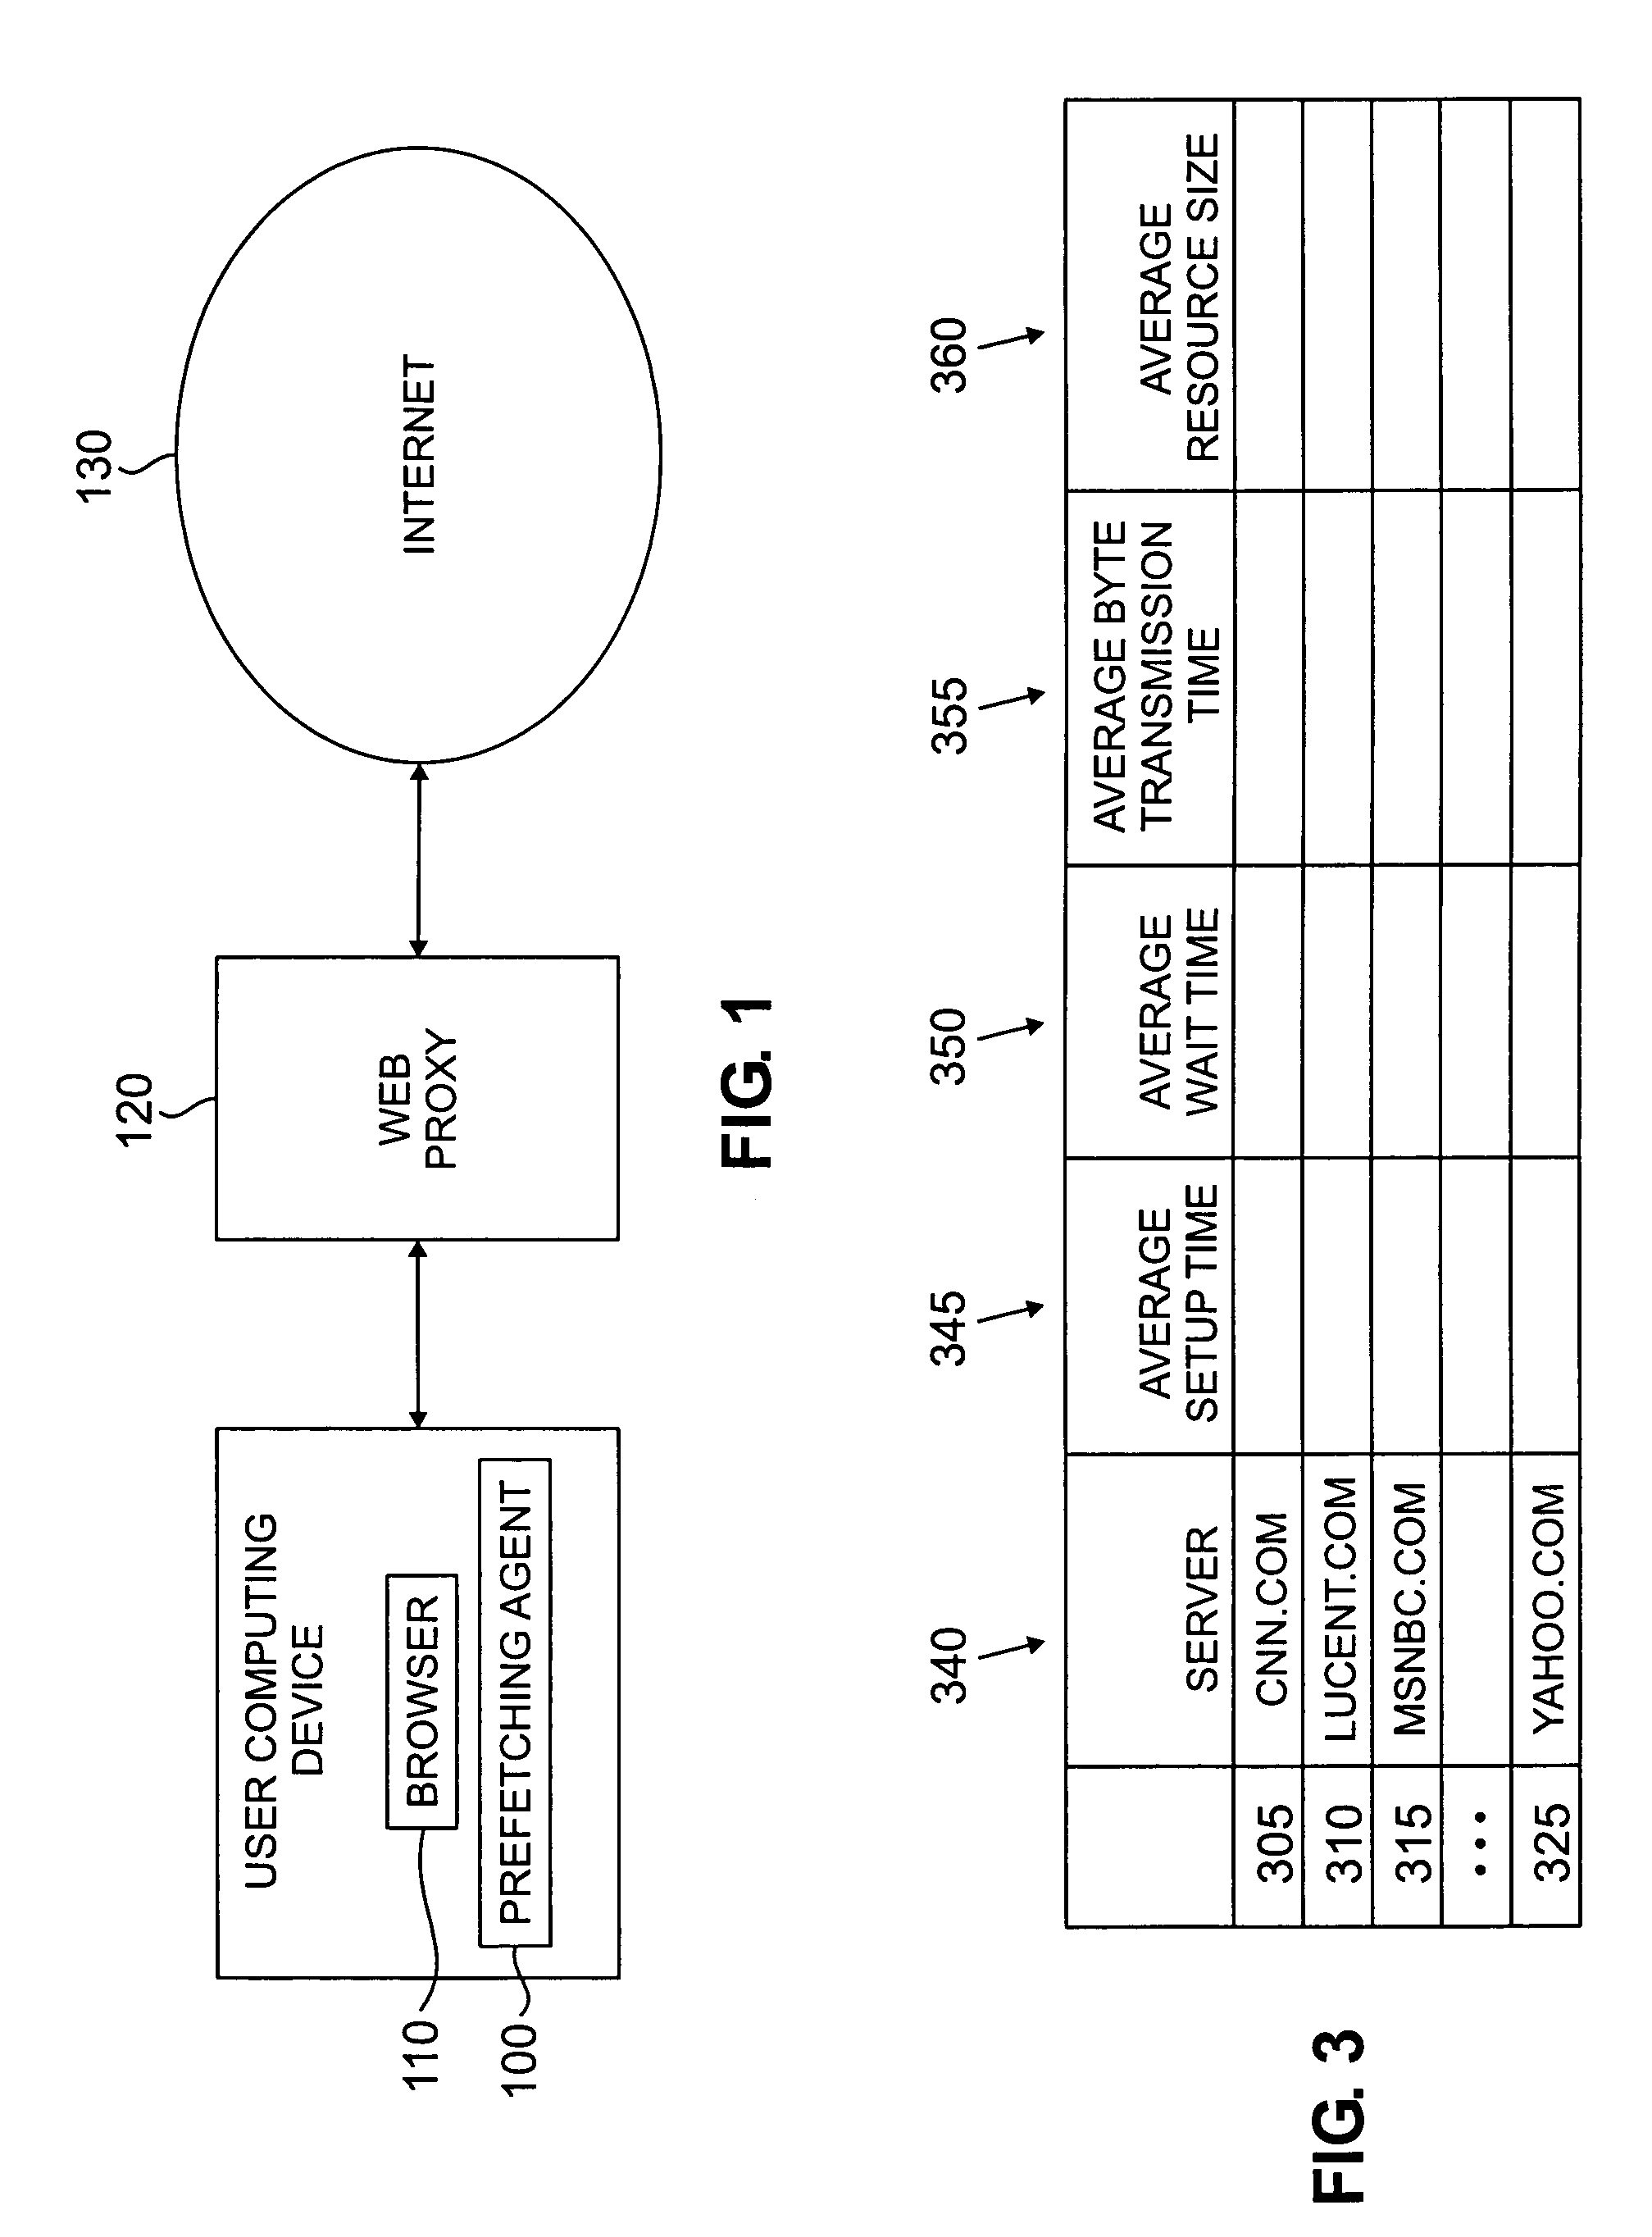 Method and apparatus for prefetching internet resources based on estimated round trip time